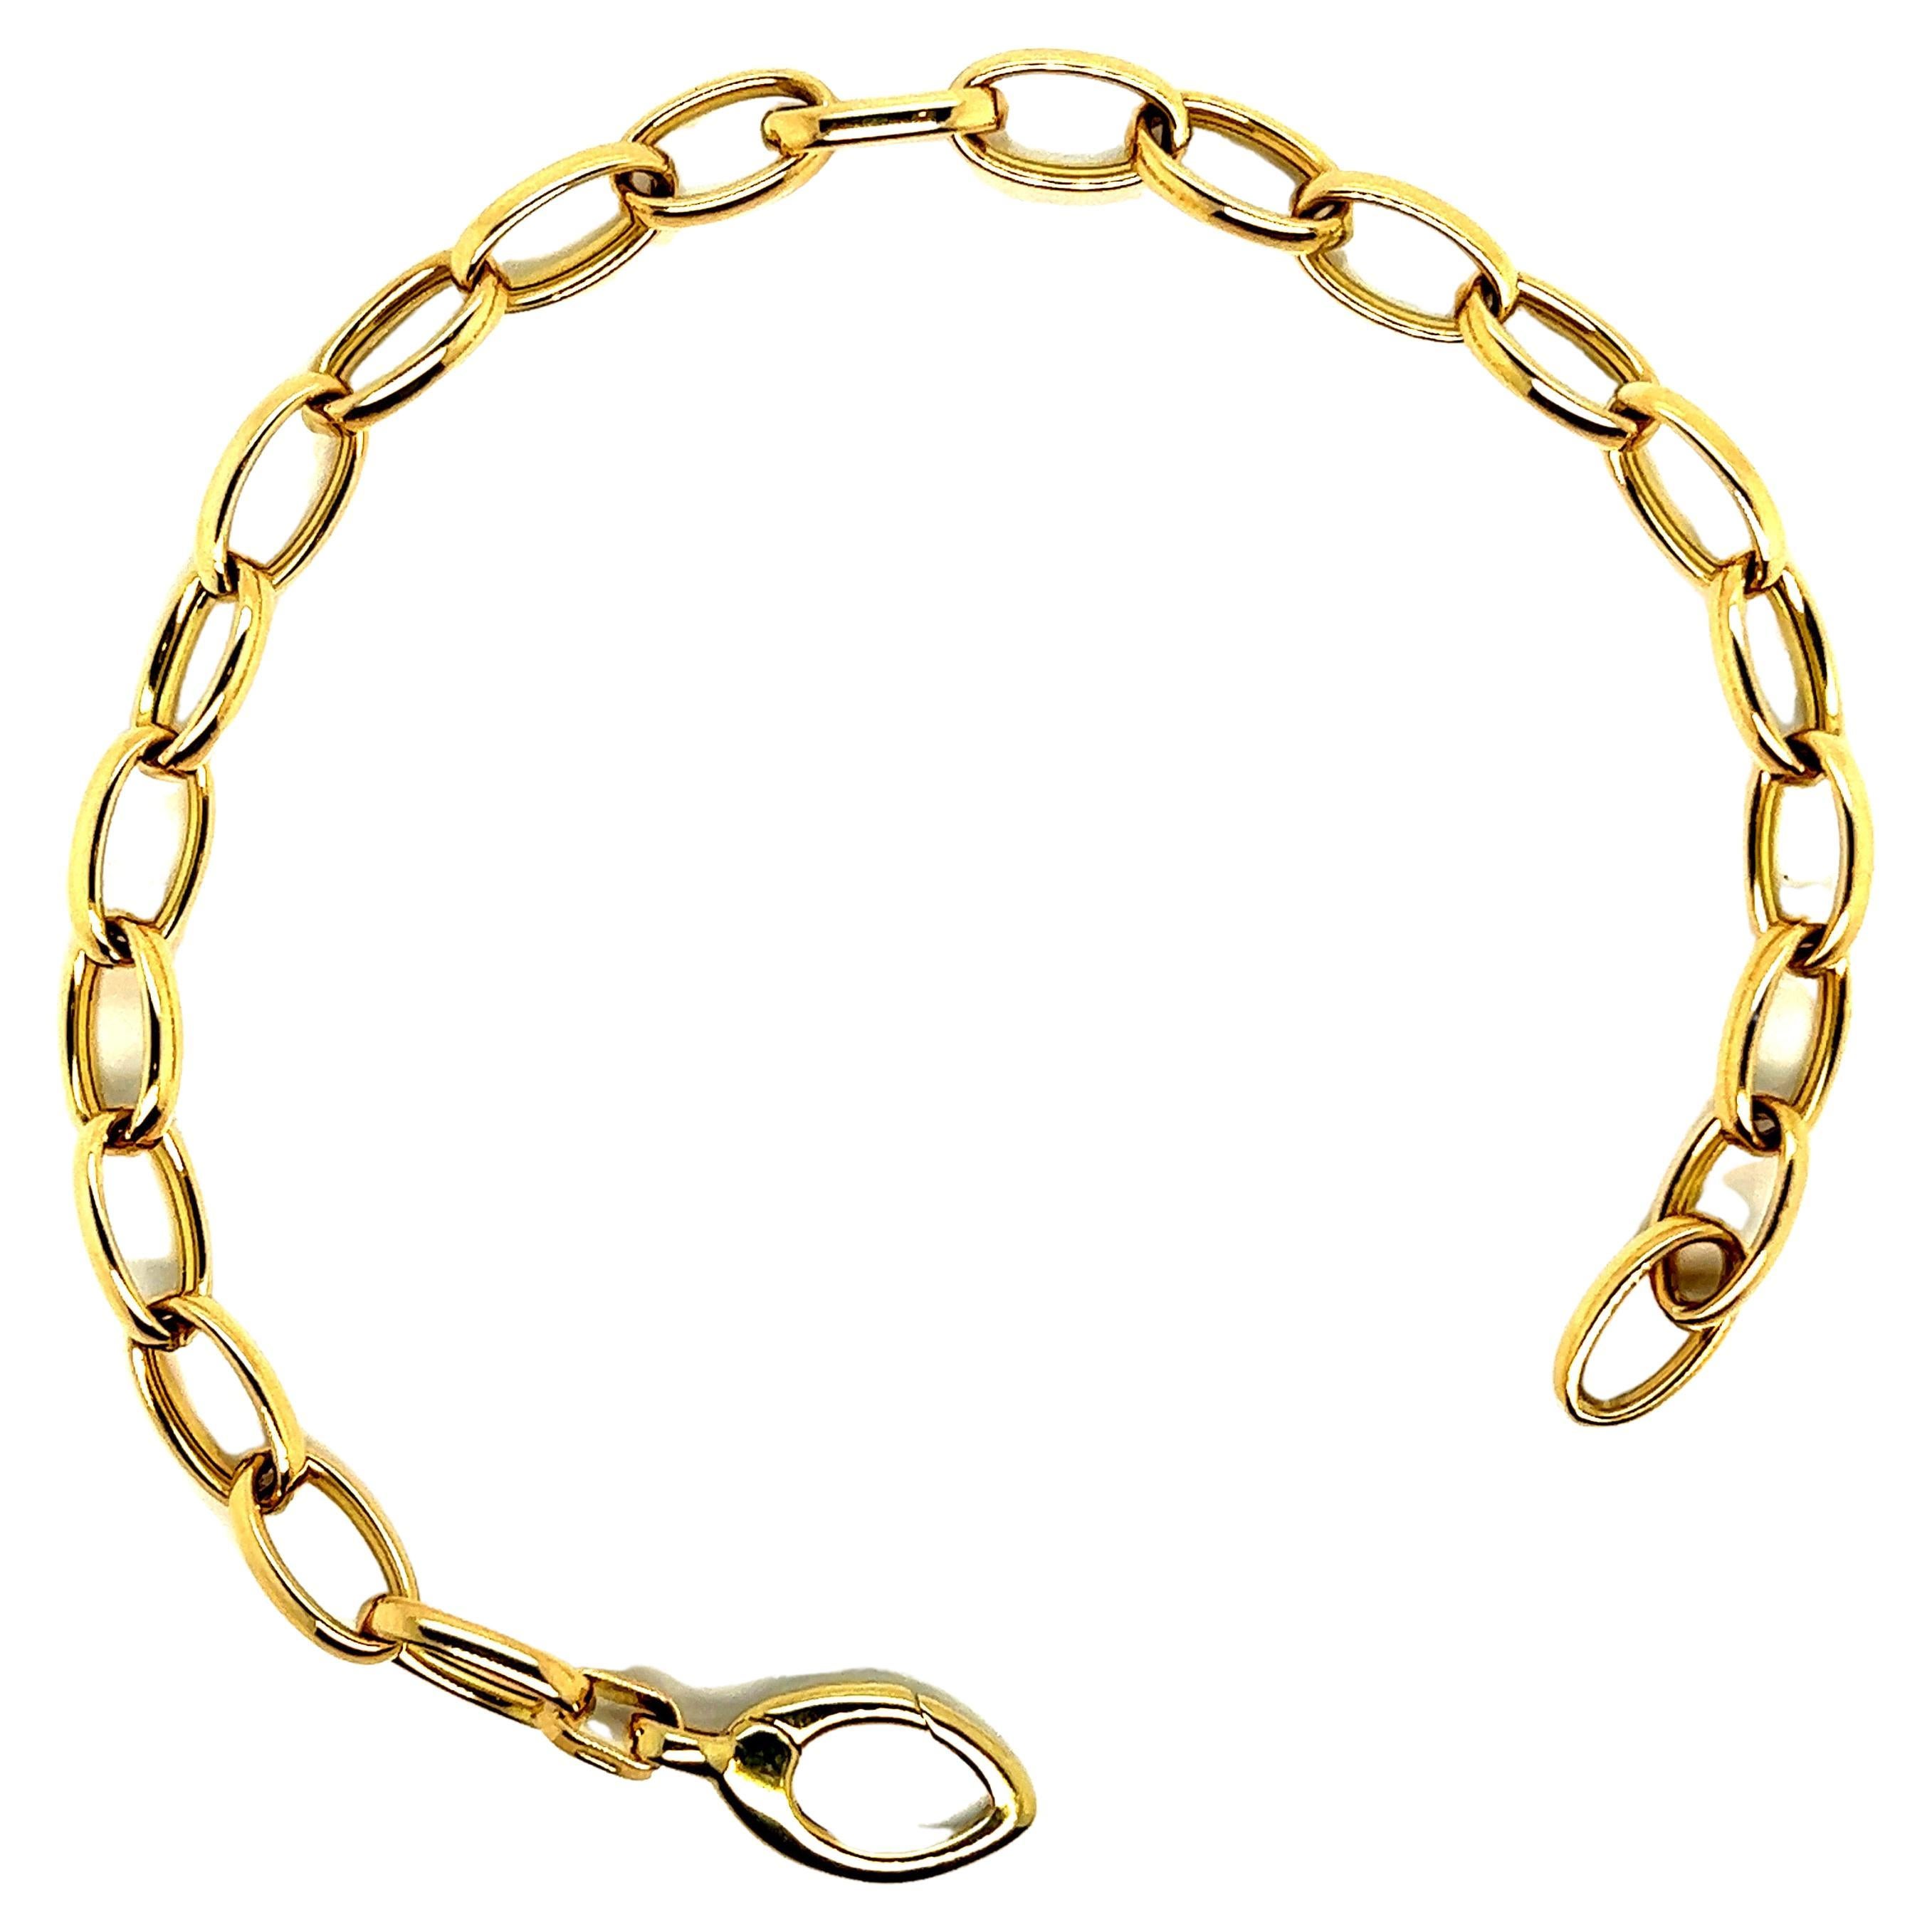 Bracelet French Curb Small Links Yellow Gold 18 Karat For Sale